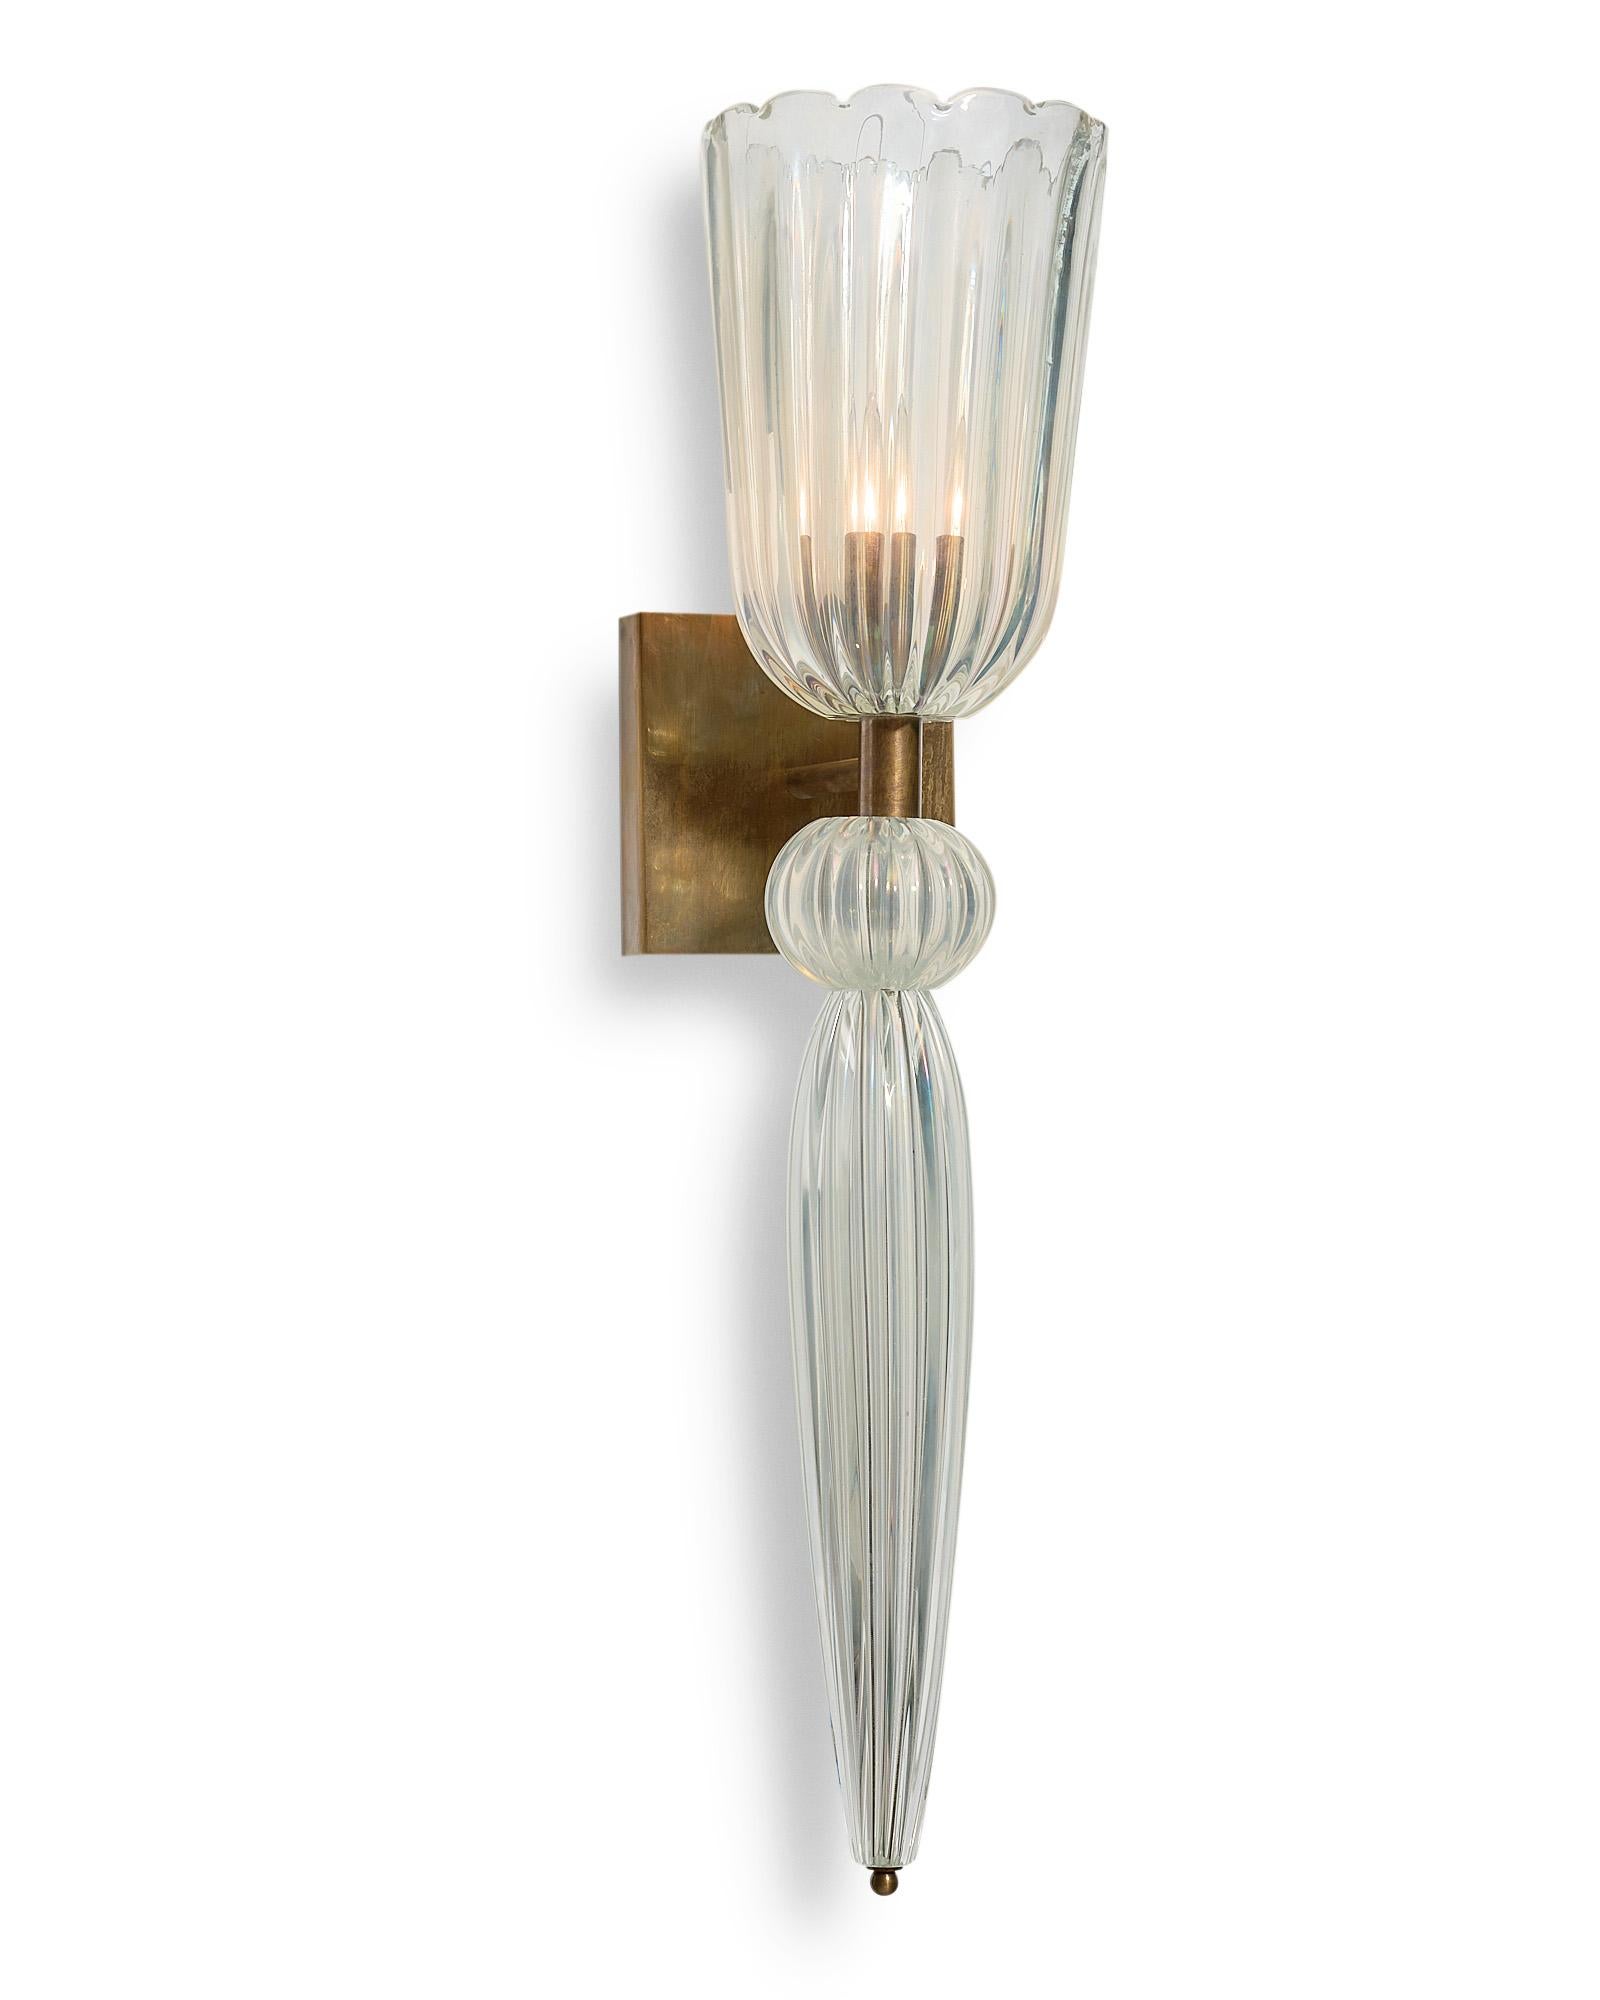 Pair of sconces, Italian, from the island of Murano. This hand blown pair has a beautiful iridescent finish to the glass and is supported on brass structures. They have been newly wired to fit US standards.

This pair is a special order from our